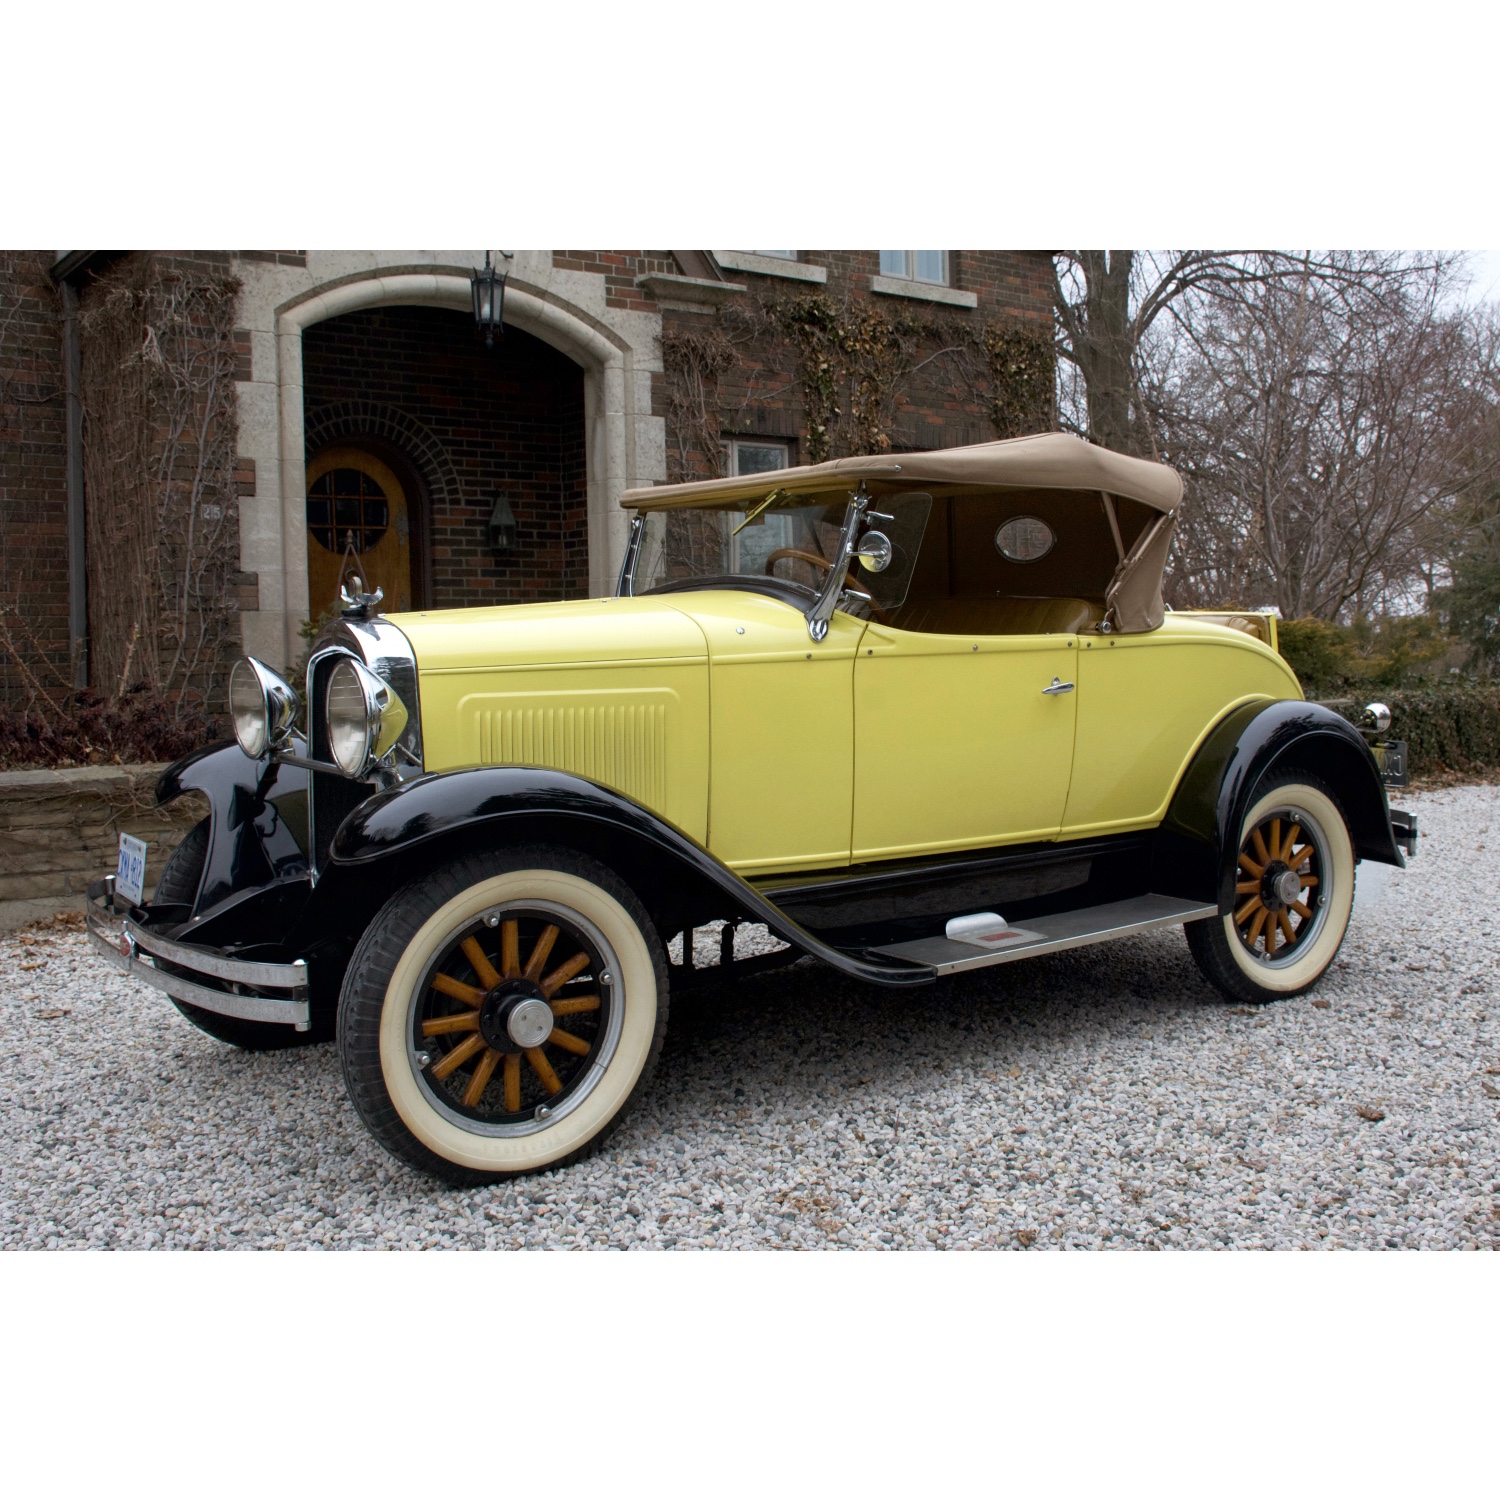 1929 Whippet roadster was the top Howard Meyer estate lot at Miller and Miller